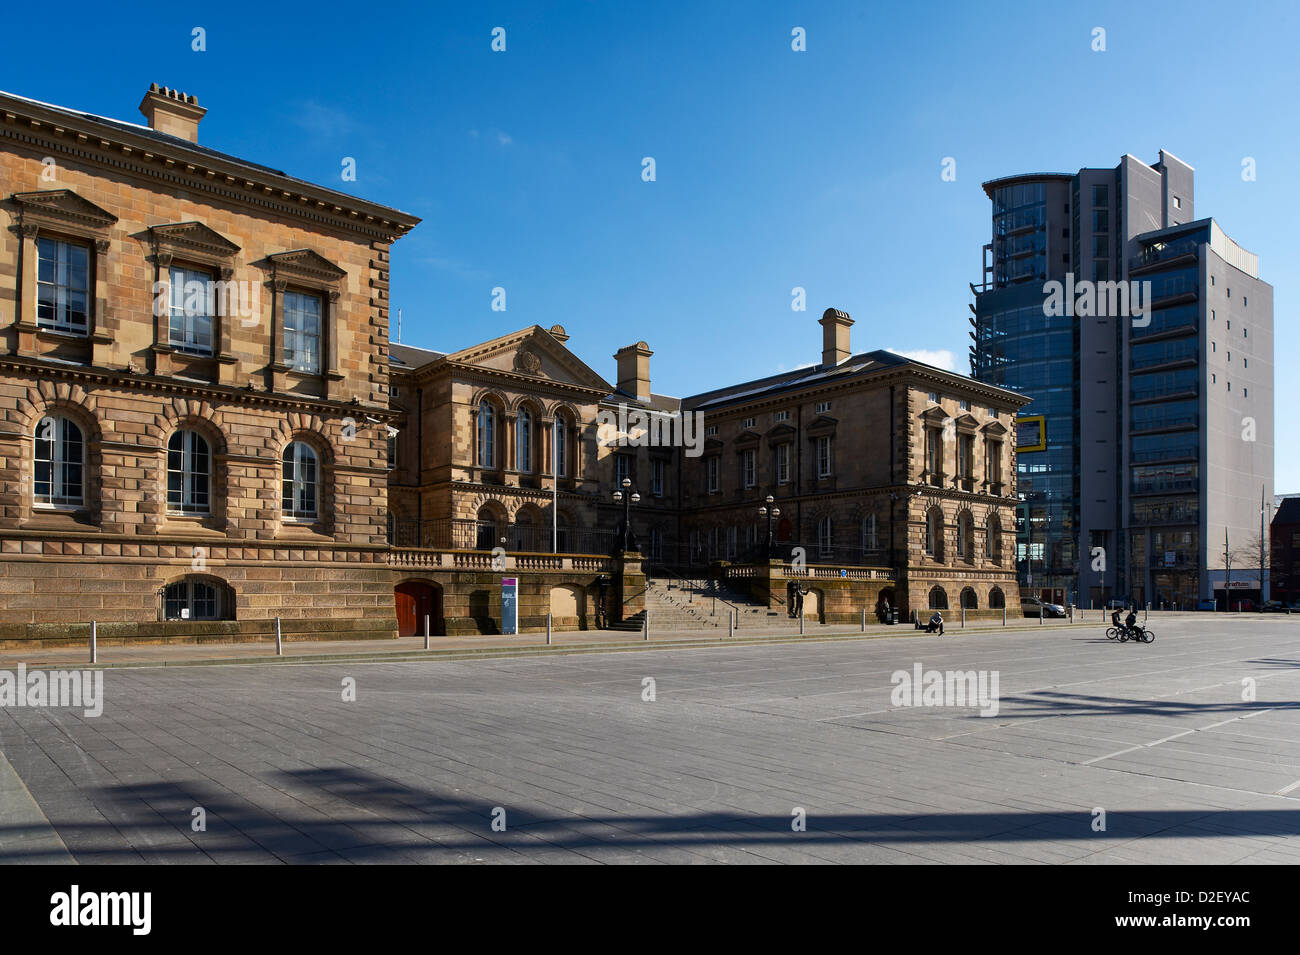 Custom Square building in Belfast Northern Ireland with The Boat office building in the background Stock Photo